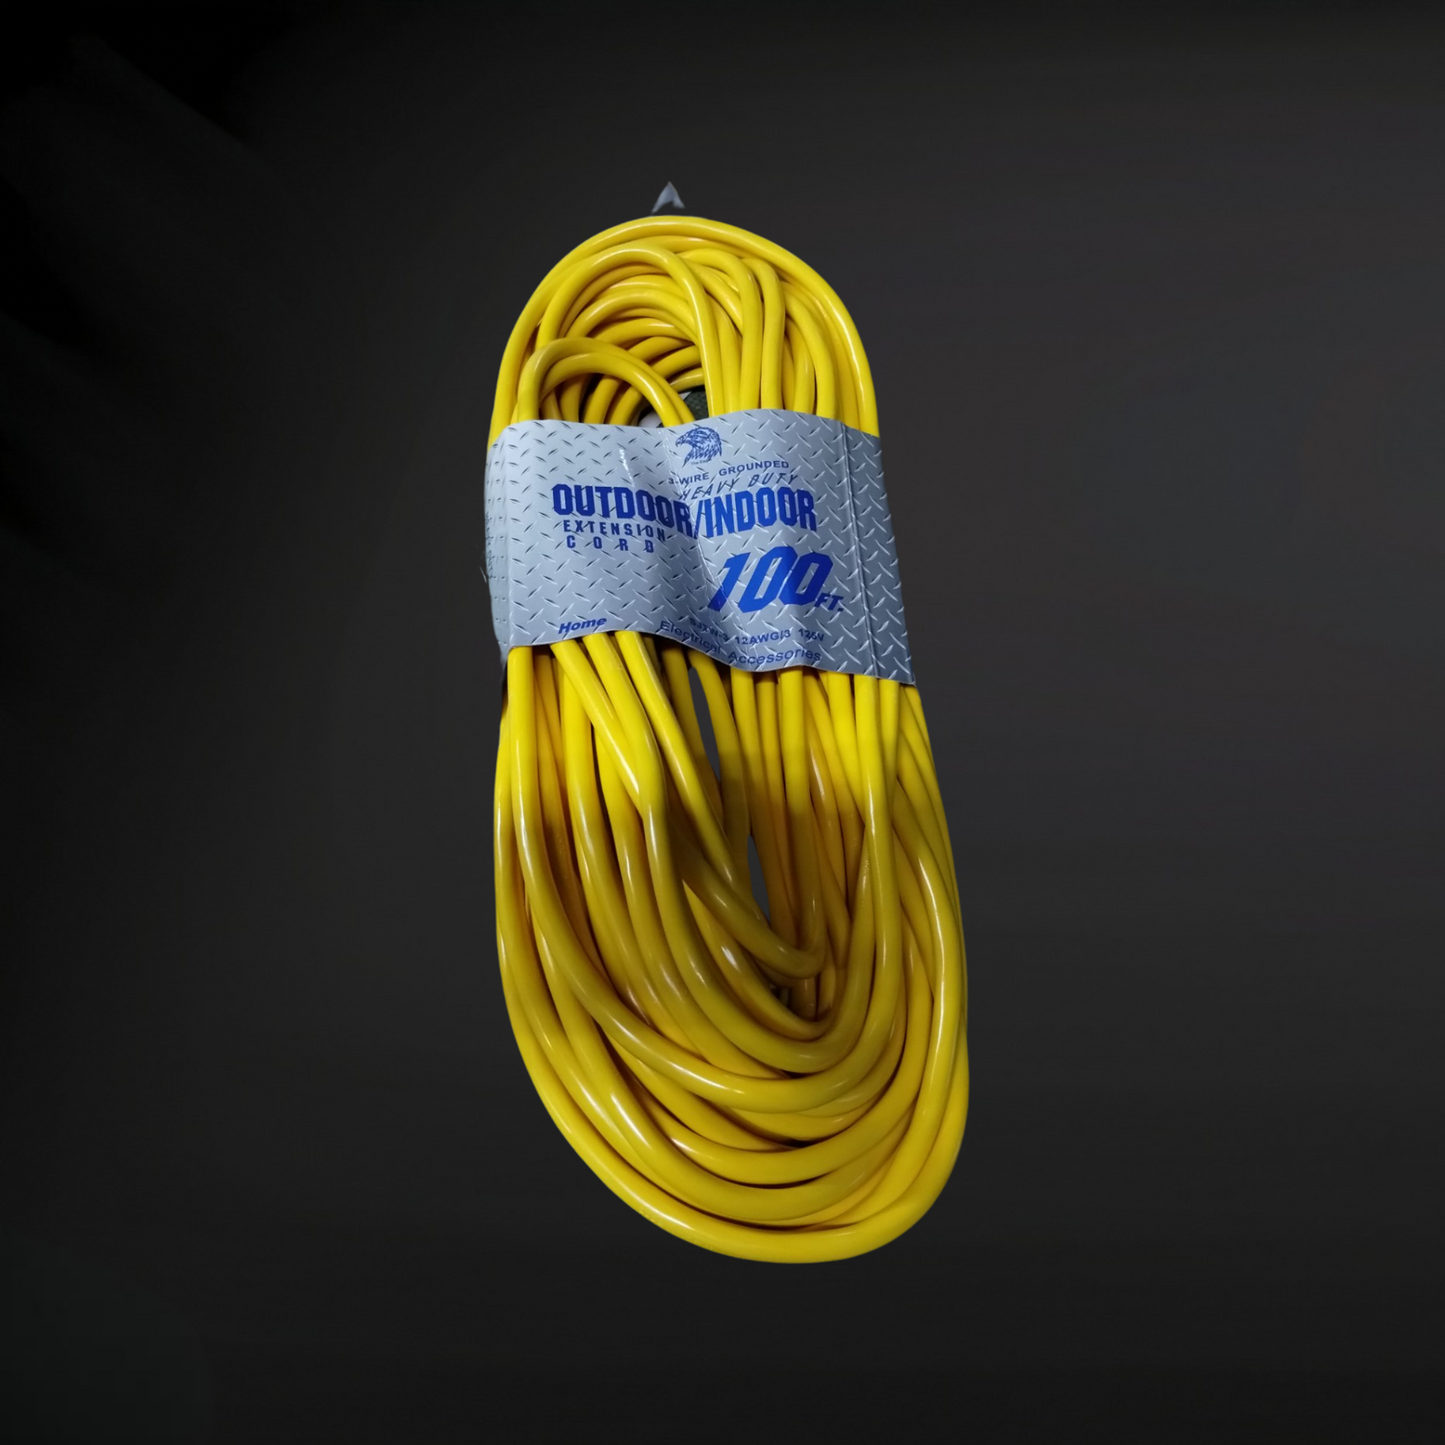 Durable 100ft Indoor/Outdoor Extension Cord | Weather-Resistant Power Cable Yellow/Orange